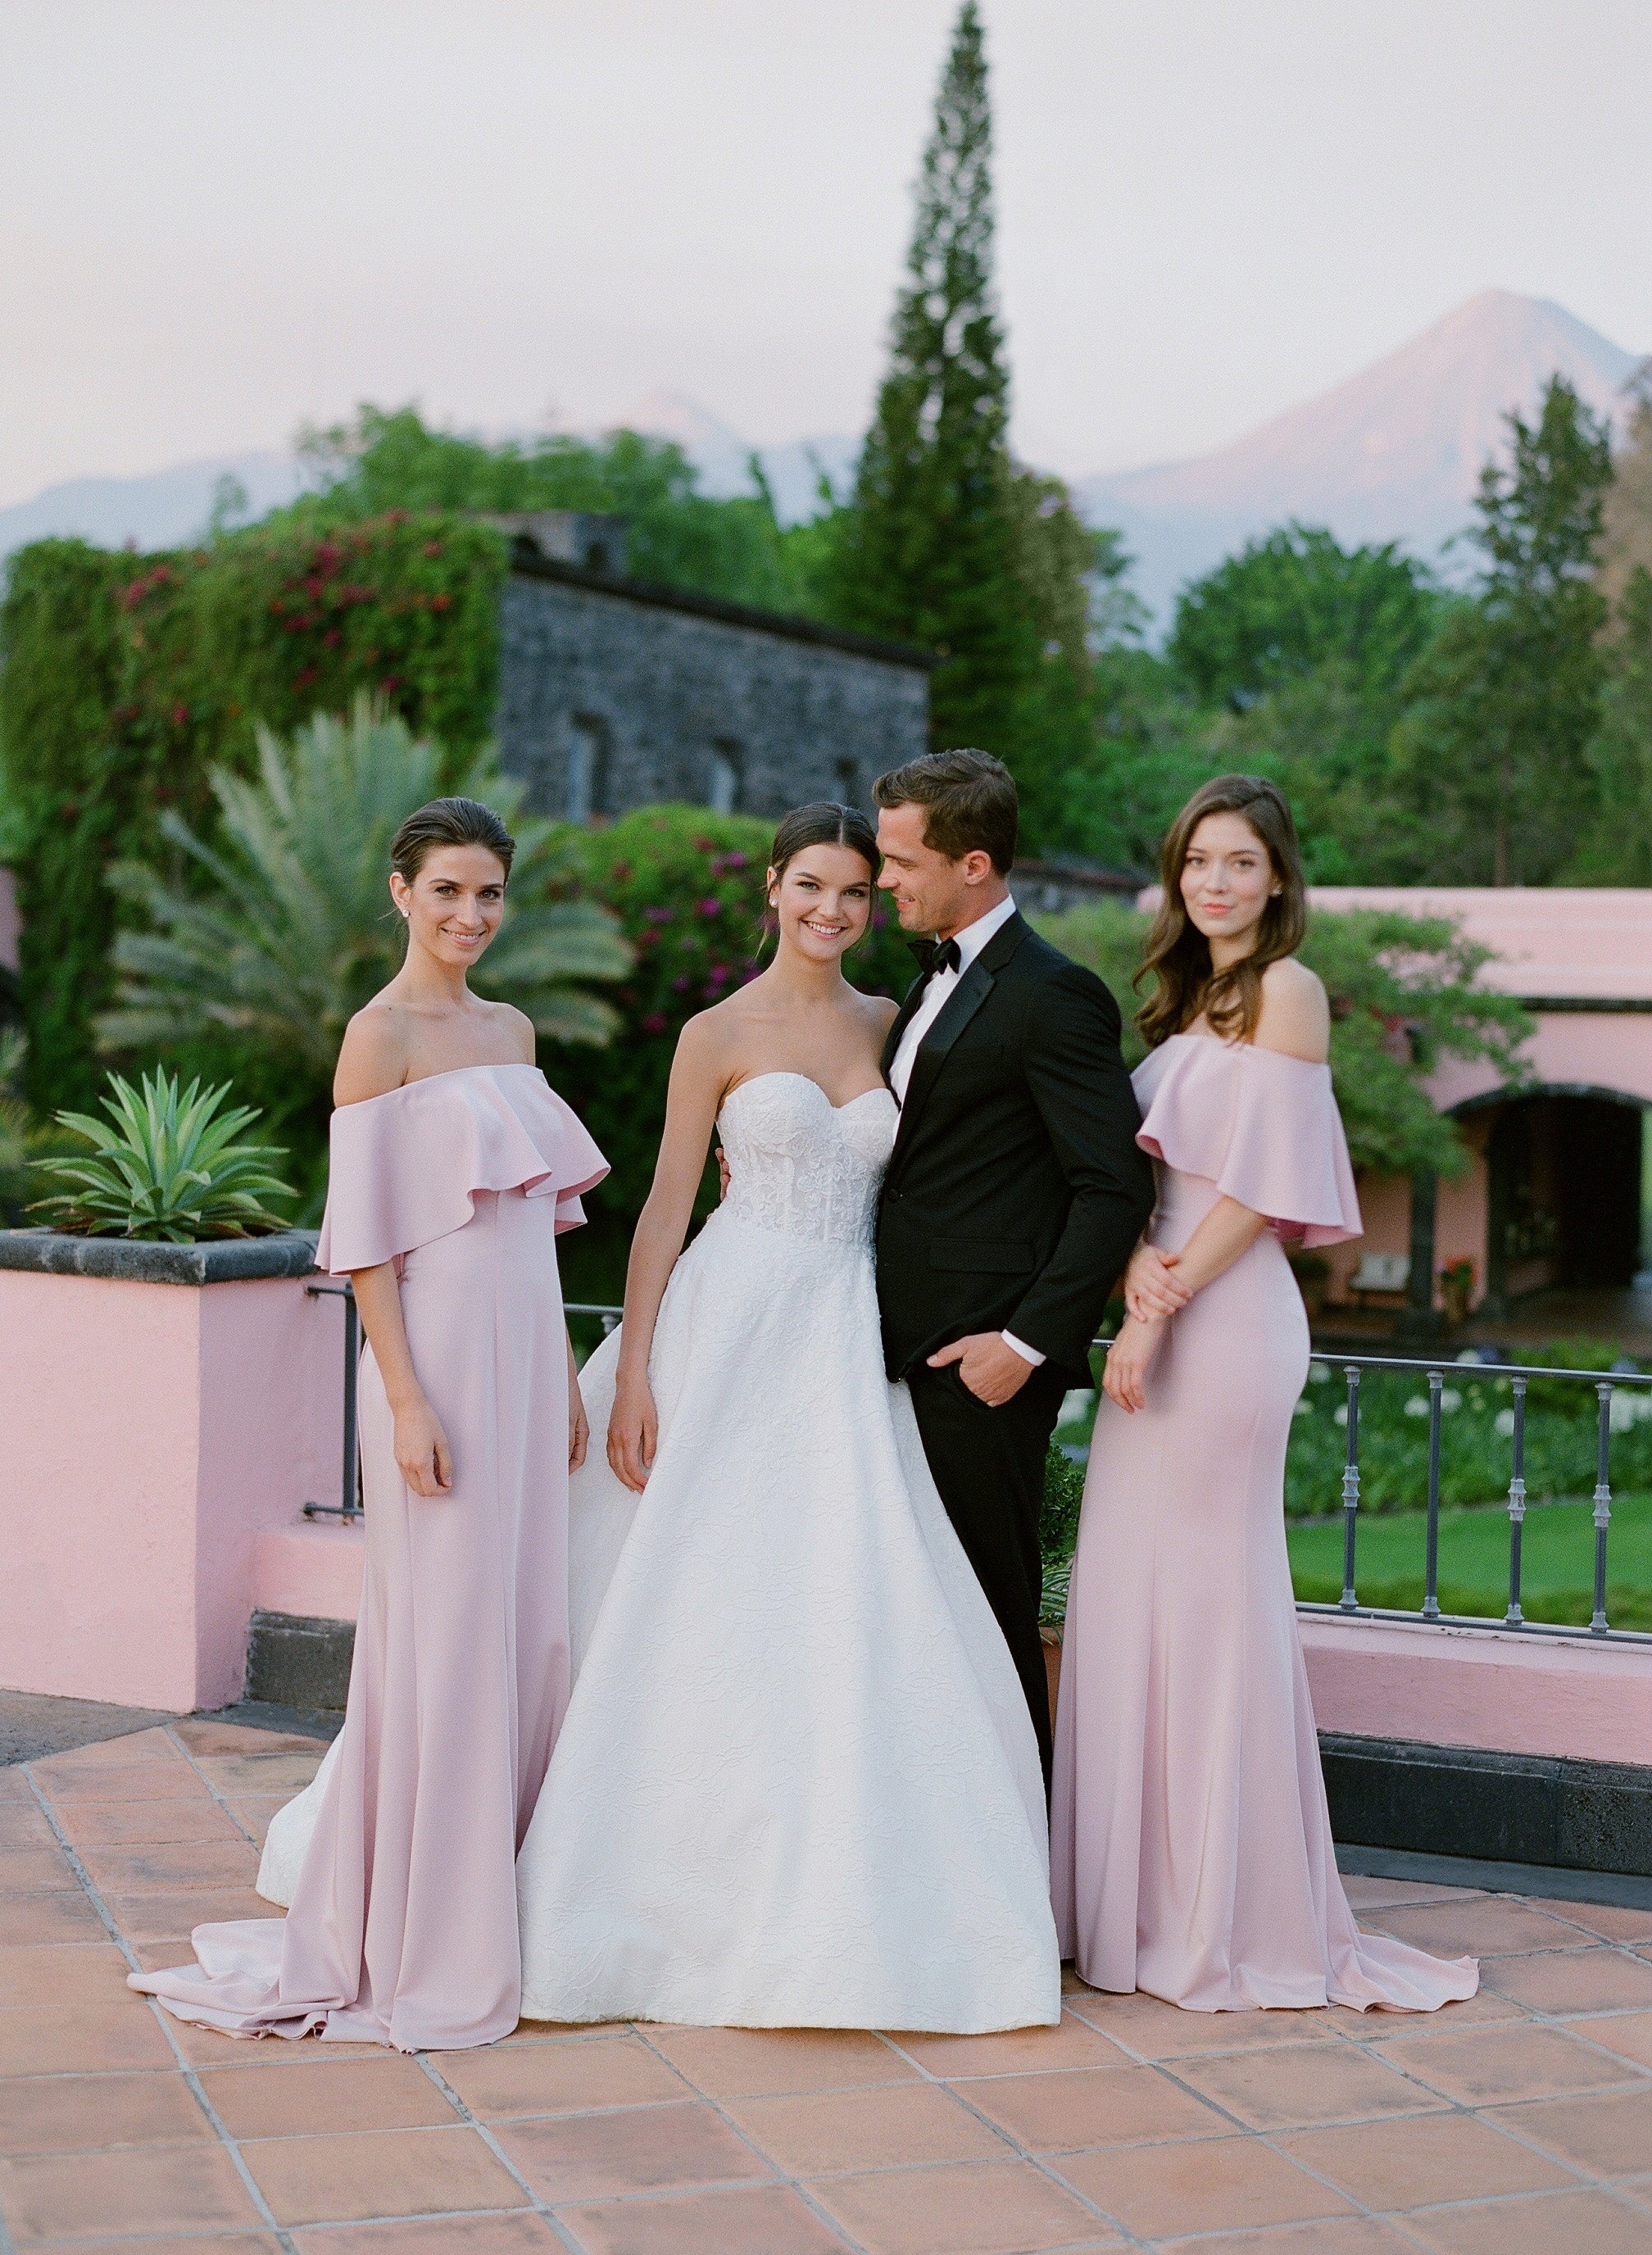 #KleinfeldEditorial We took our newest wedding dresses, bridesmaids dresses and flower girl dresses from Kleinfeld Bridal and Kleinfeld Bridal Party down to the Hacienda San Antonio in Colima Mexico for a stunning editorial photoshoot—whether you're a lover of ruffles and big princess skirts or your vibe is more of a modern minimalist, there are styles and plenty of inspiration for every bride!